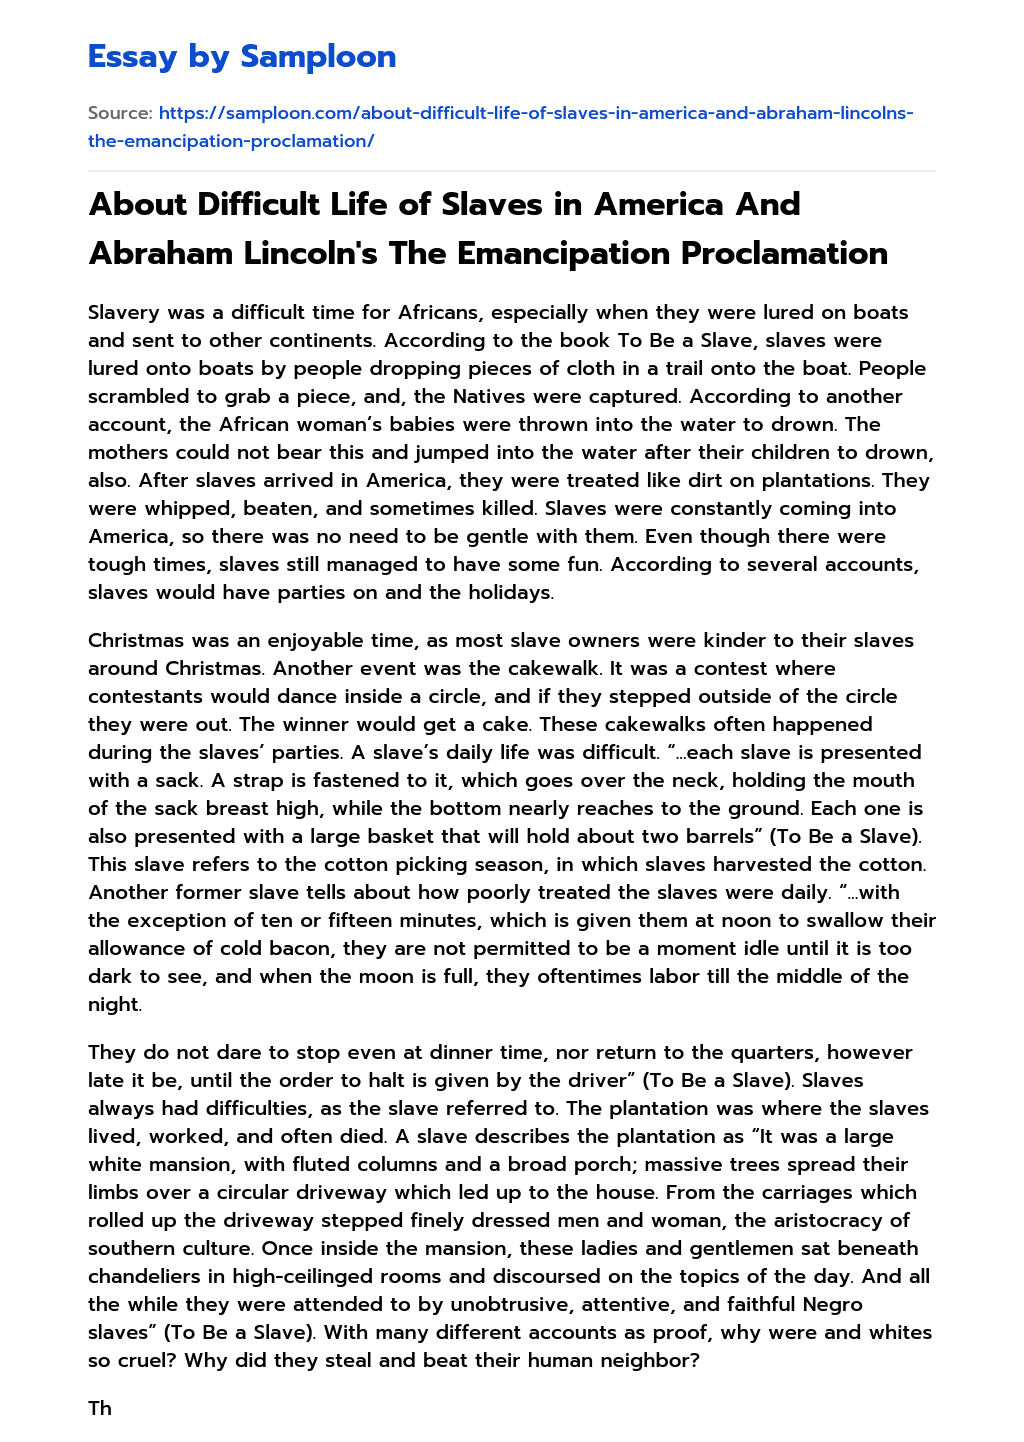 About Difficult Life of Slaves in America And Abraham Lincoln’s The Emancipation Proclamation essay